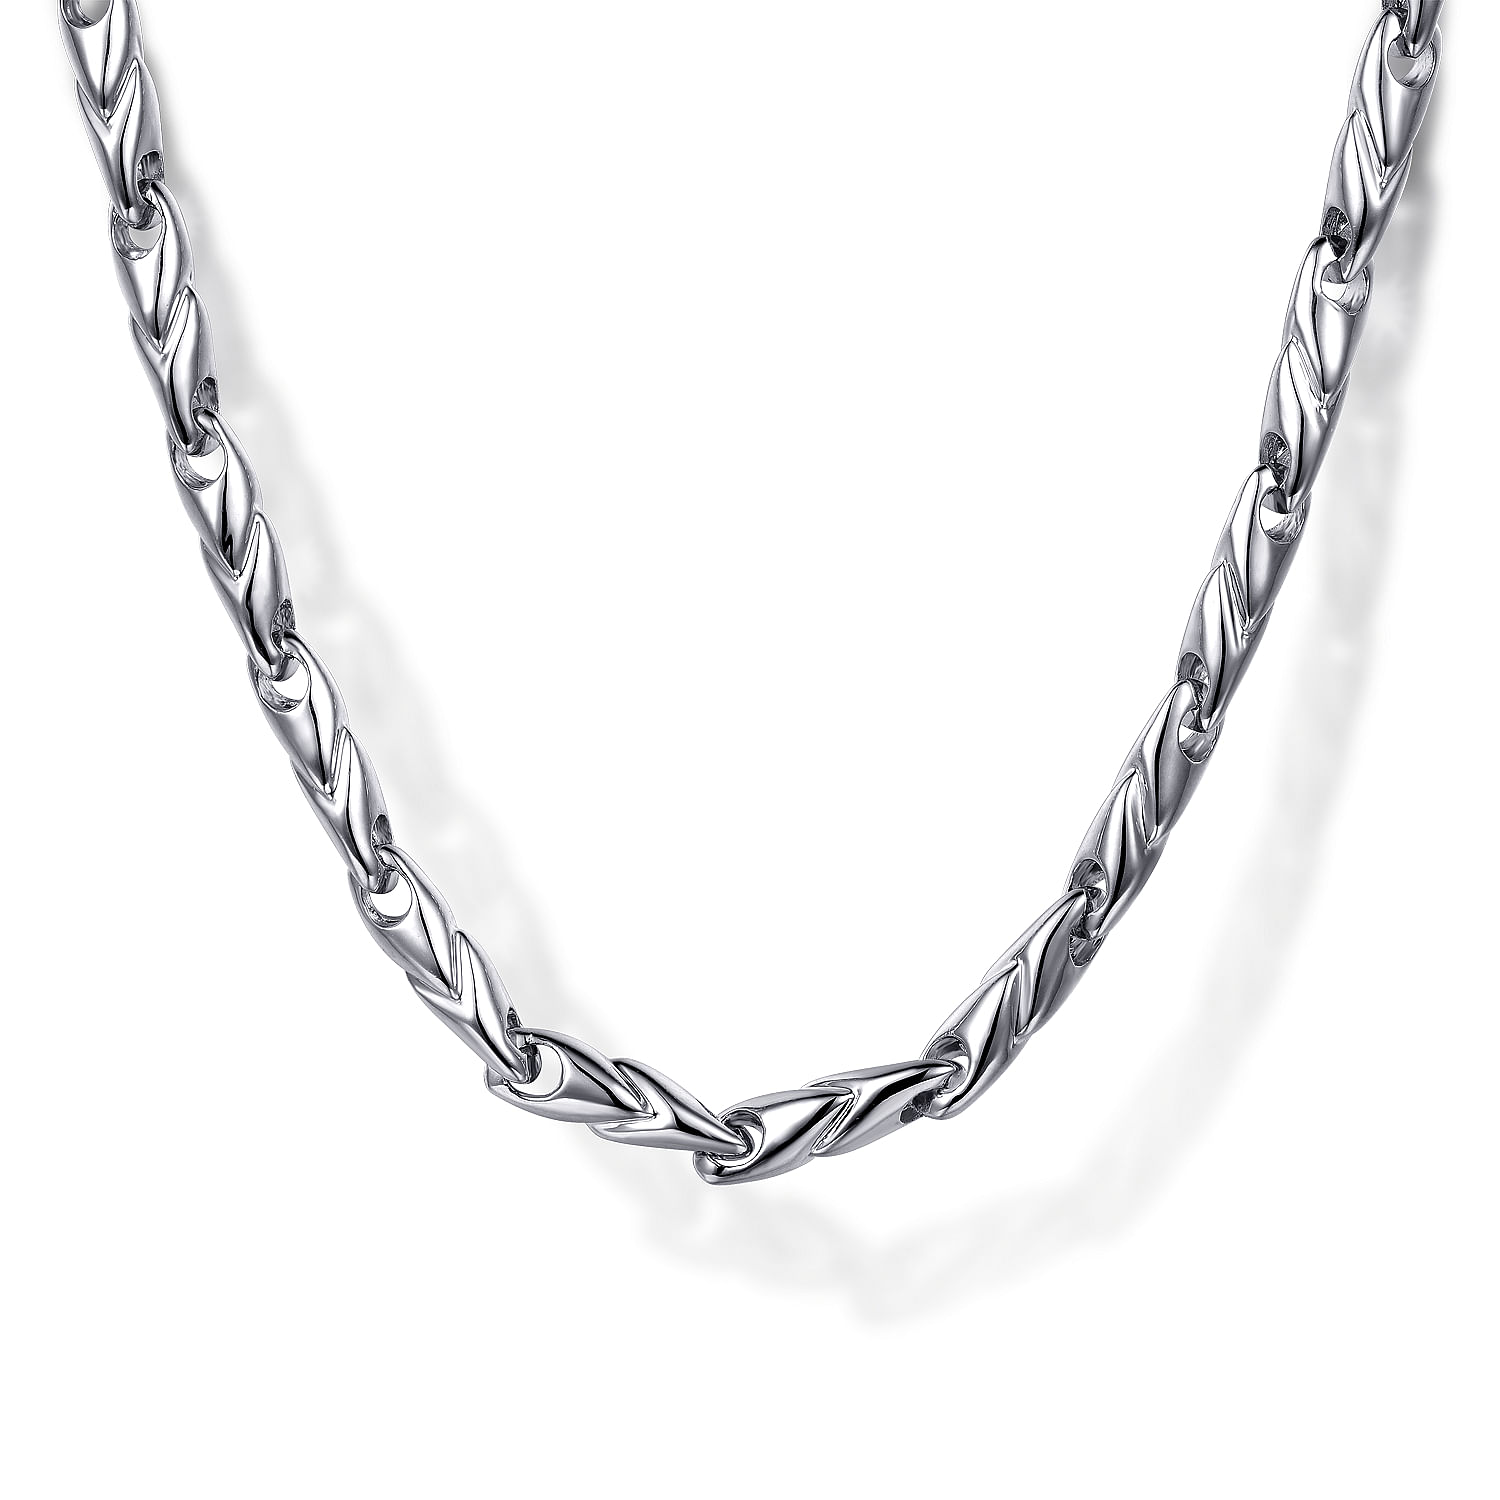 24 Inch 925 Sterling Silver Mens Chain Necklace